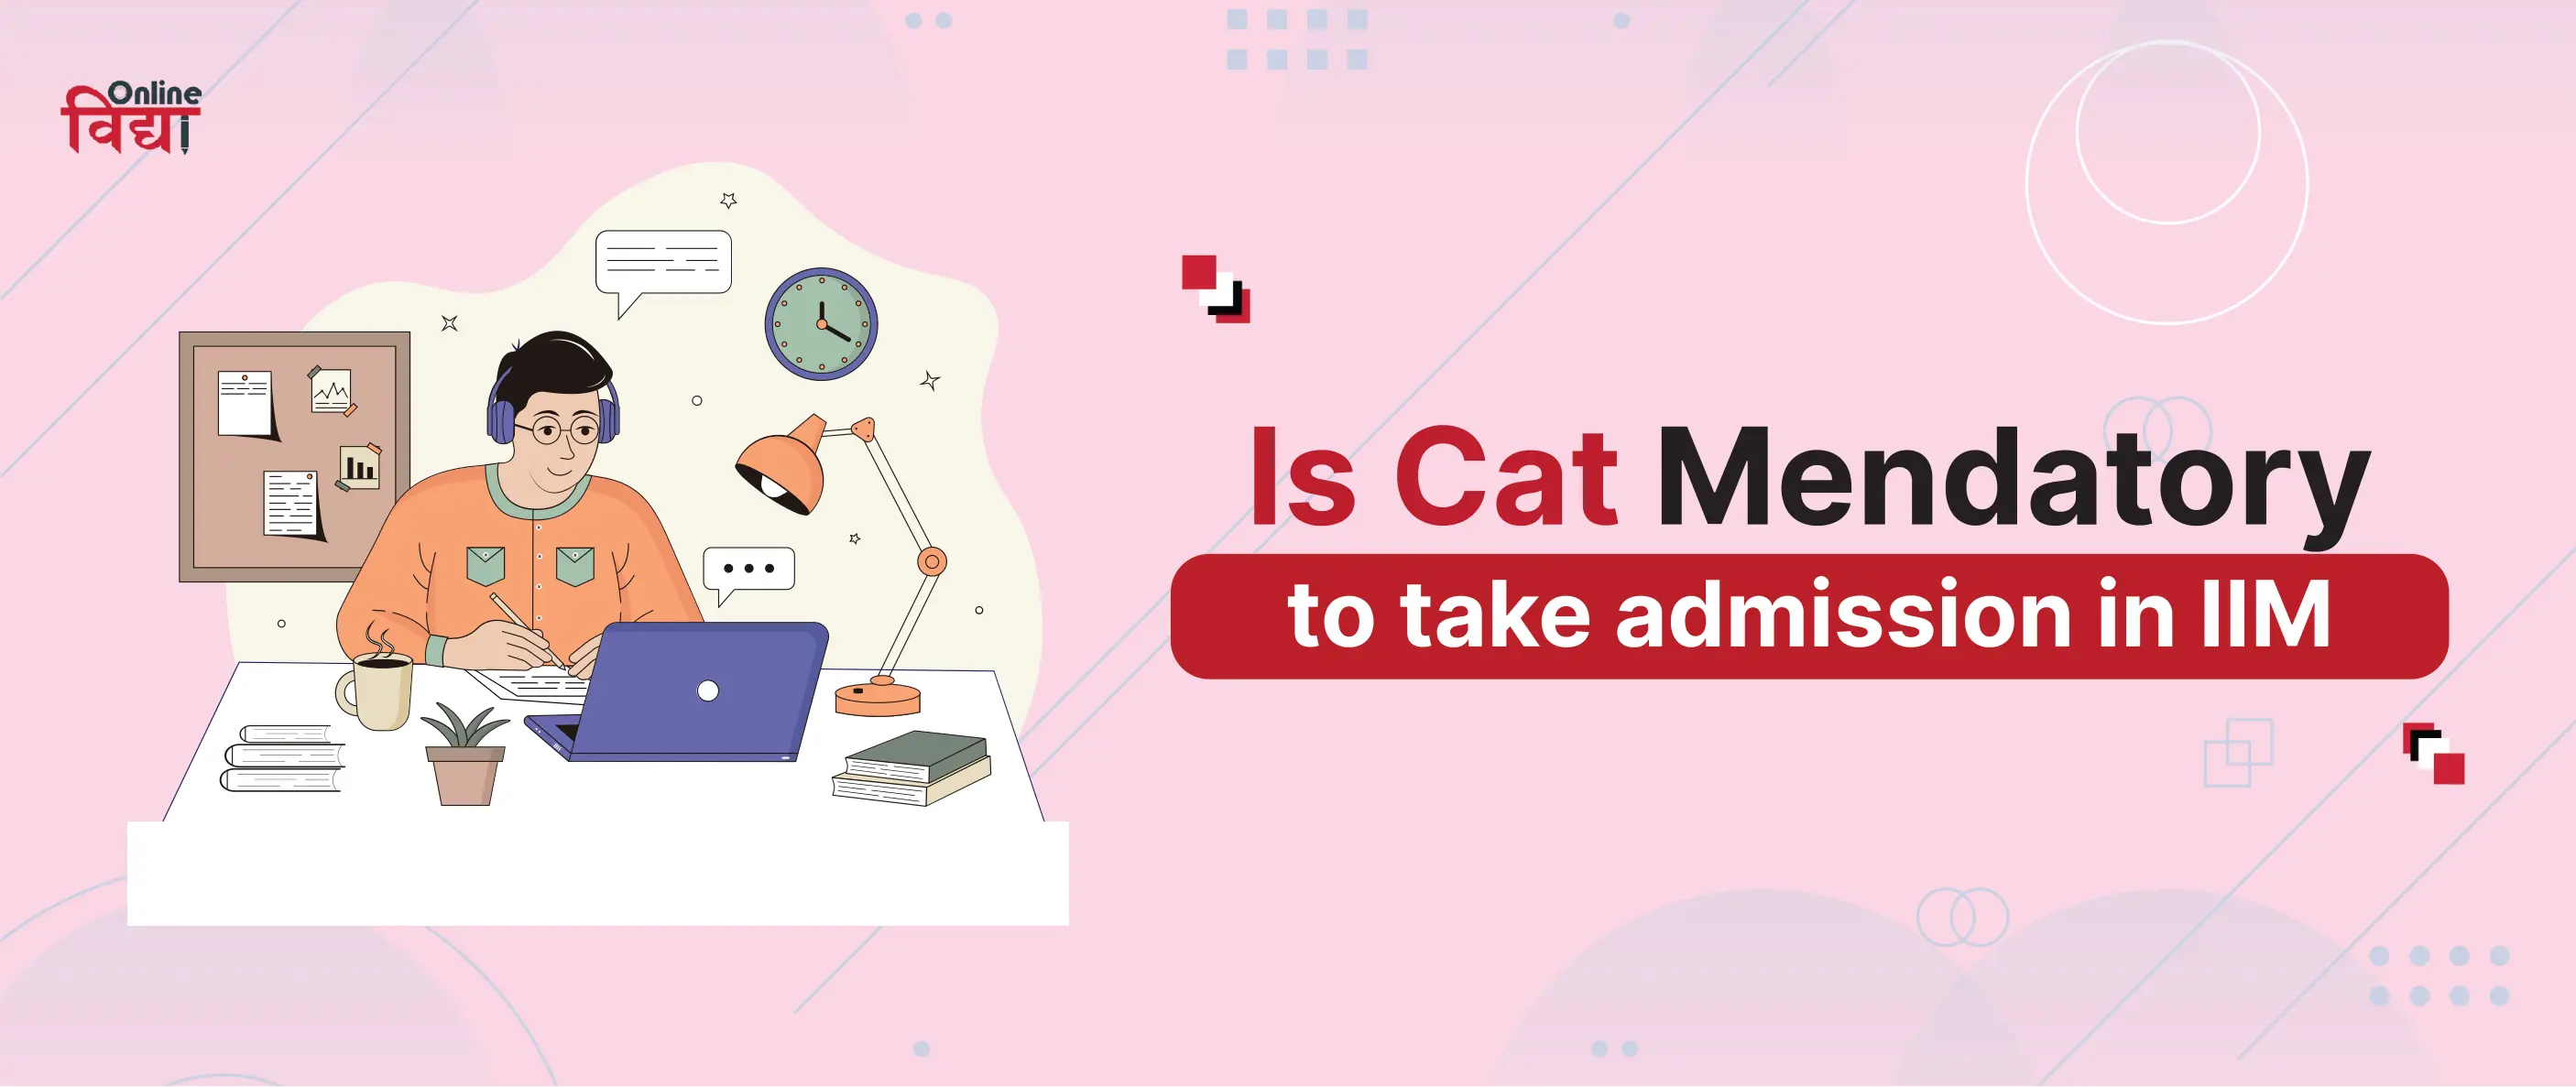 Is it Mandatory to take the CAT exam to gain admission to IIMs?